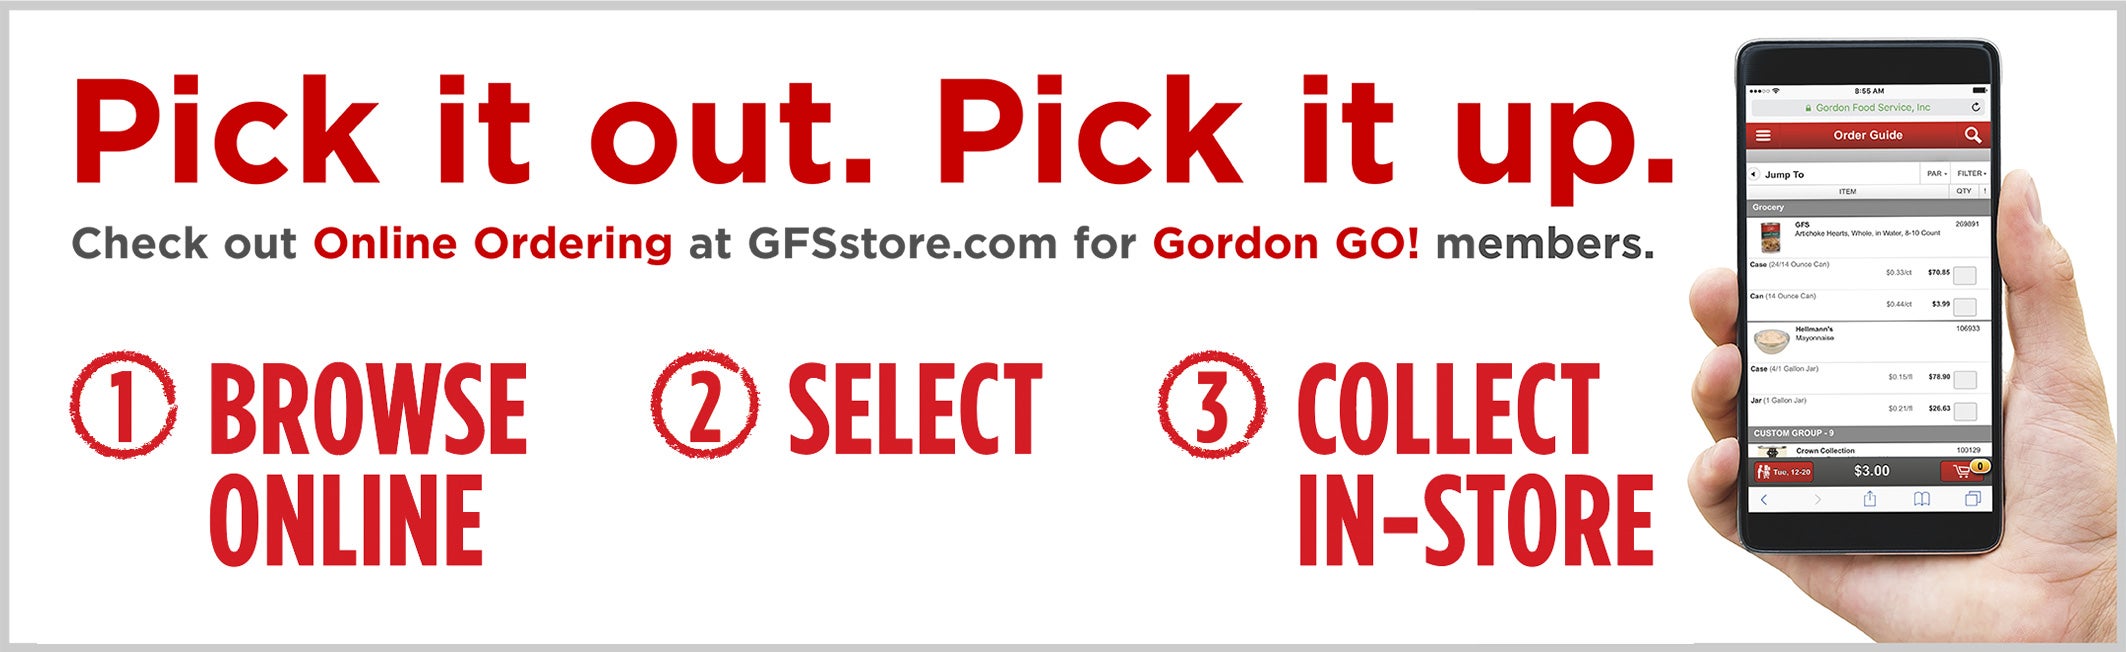 Pick it out. Pick it up. Check out Online Ordering for Gordon GO! members.